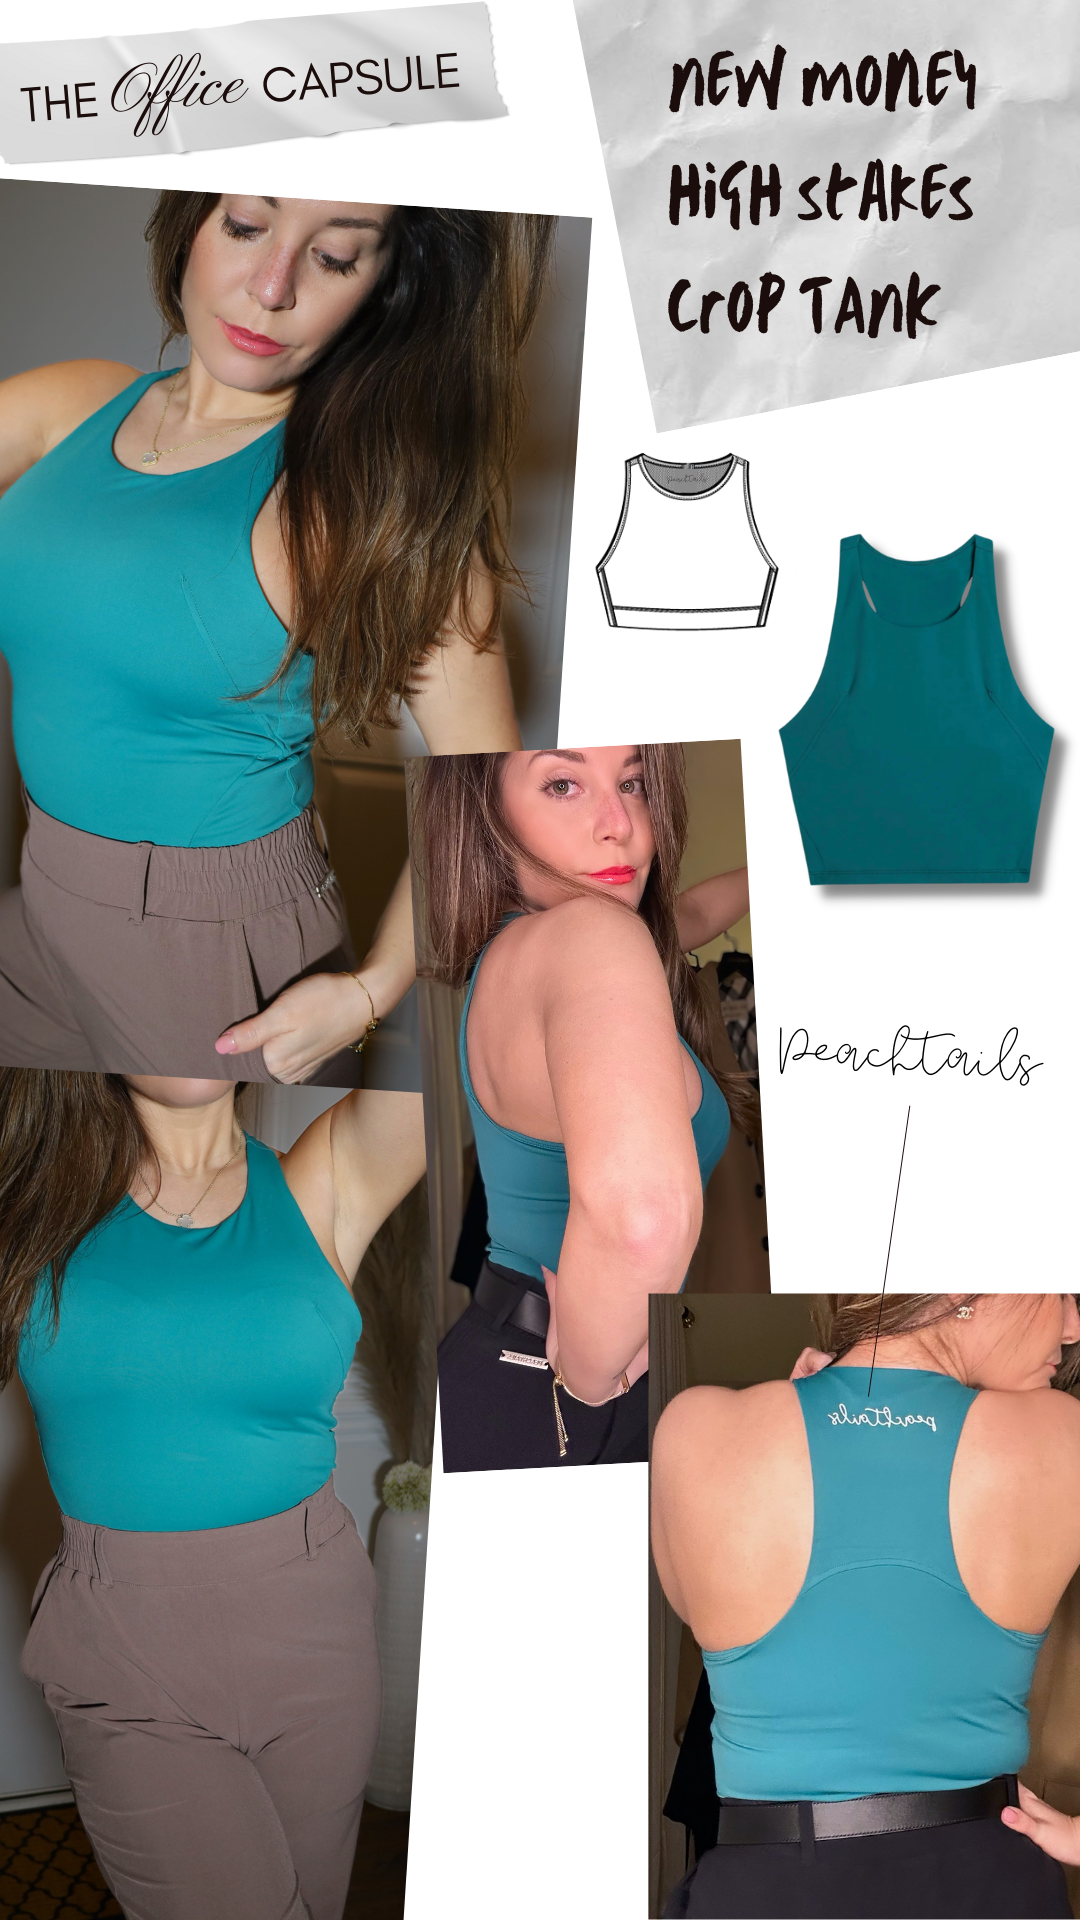 The image showcases a part of "THE OFFICE CAPSULE" collection, highlighting the "NEW MONEY HIGH STAKES CROP TANK" in a teal color. It features multiple images of a woman modeling the tank top from different angles, with a focus on the fit and design. One image displays the back of the tank top with "Peachtails" written across it, indicating the brand. There are also sketches of the tank top that give a clear view of its stylish cut.